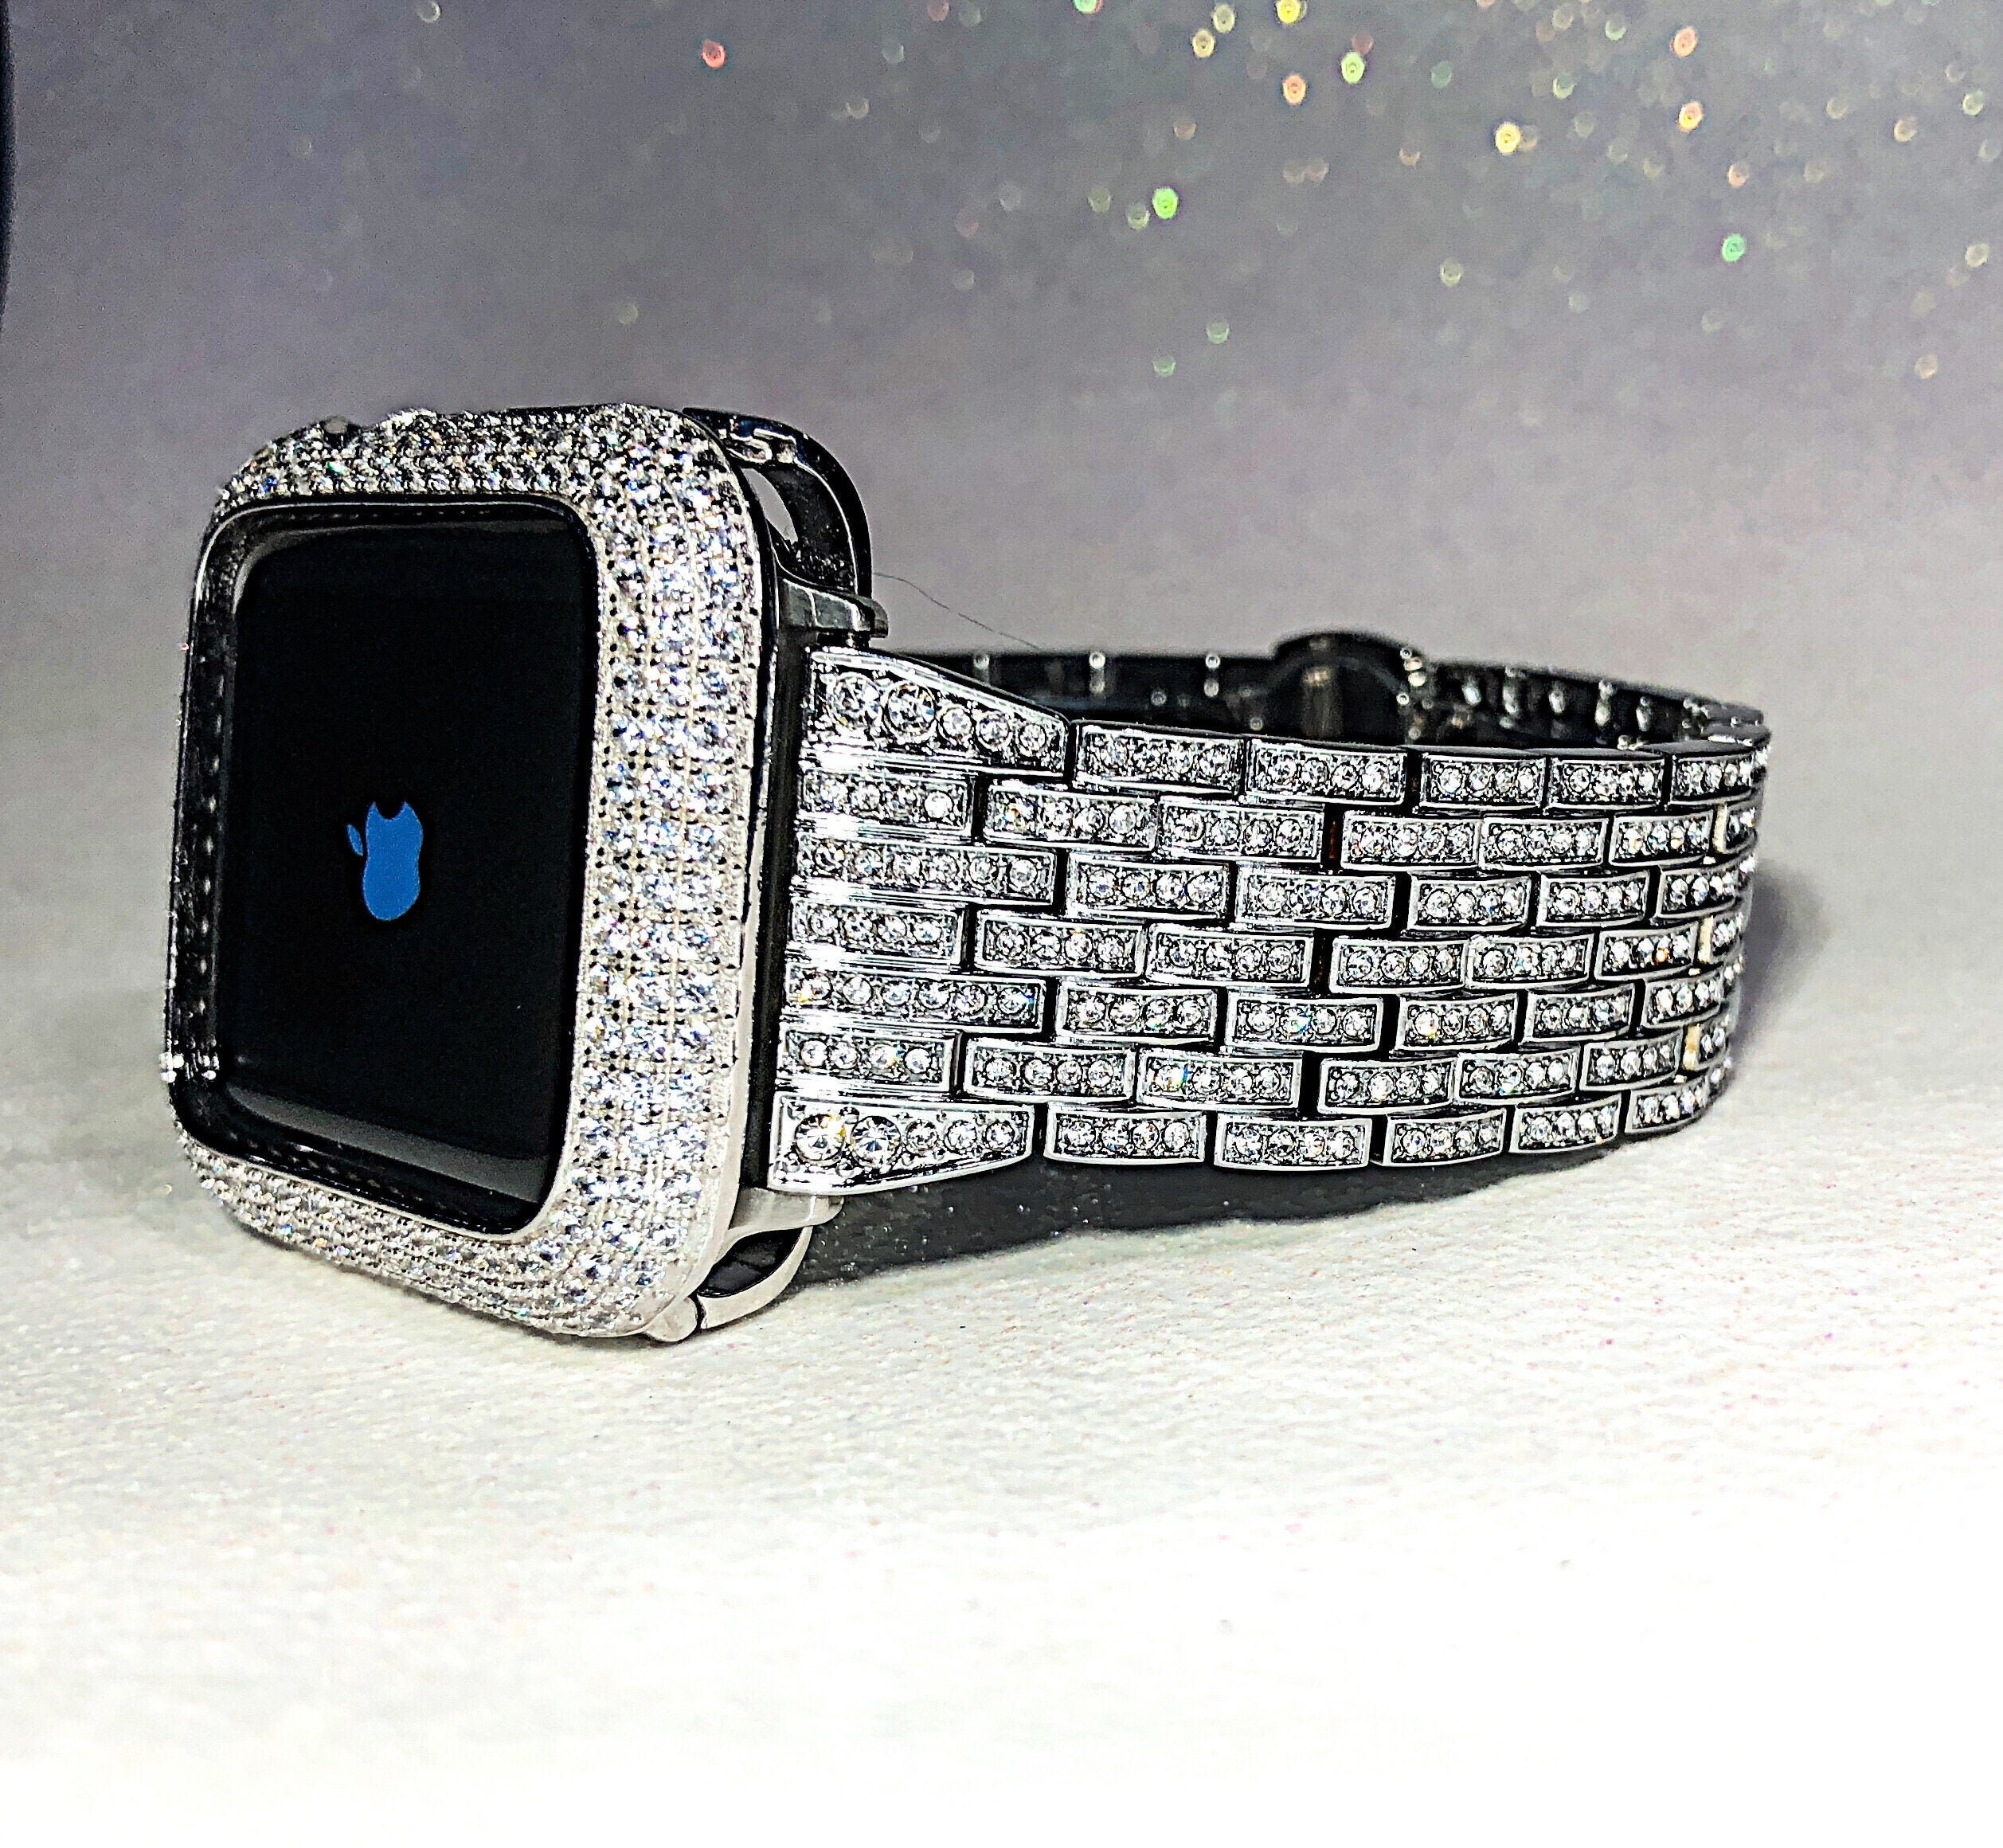 White Gold Apple Watch Accessories Band and Lab Diamond | Etsy